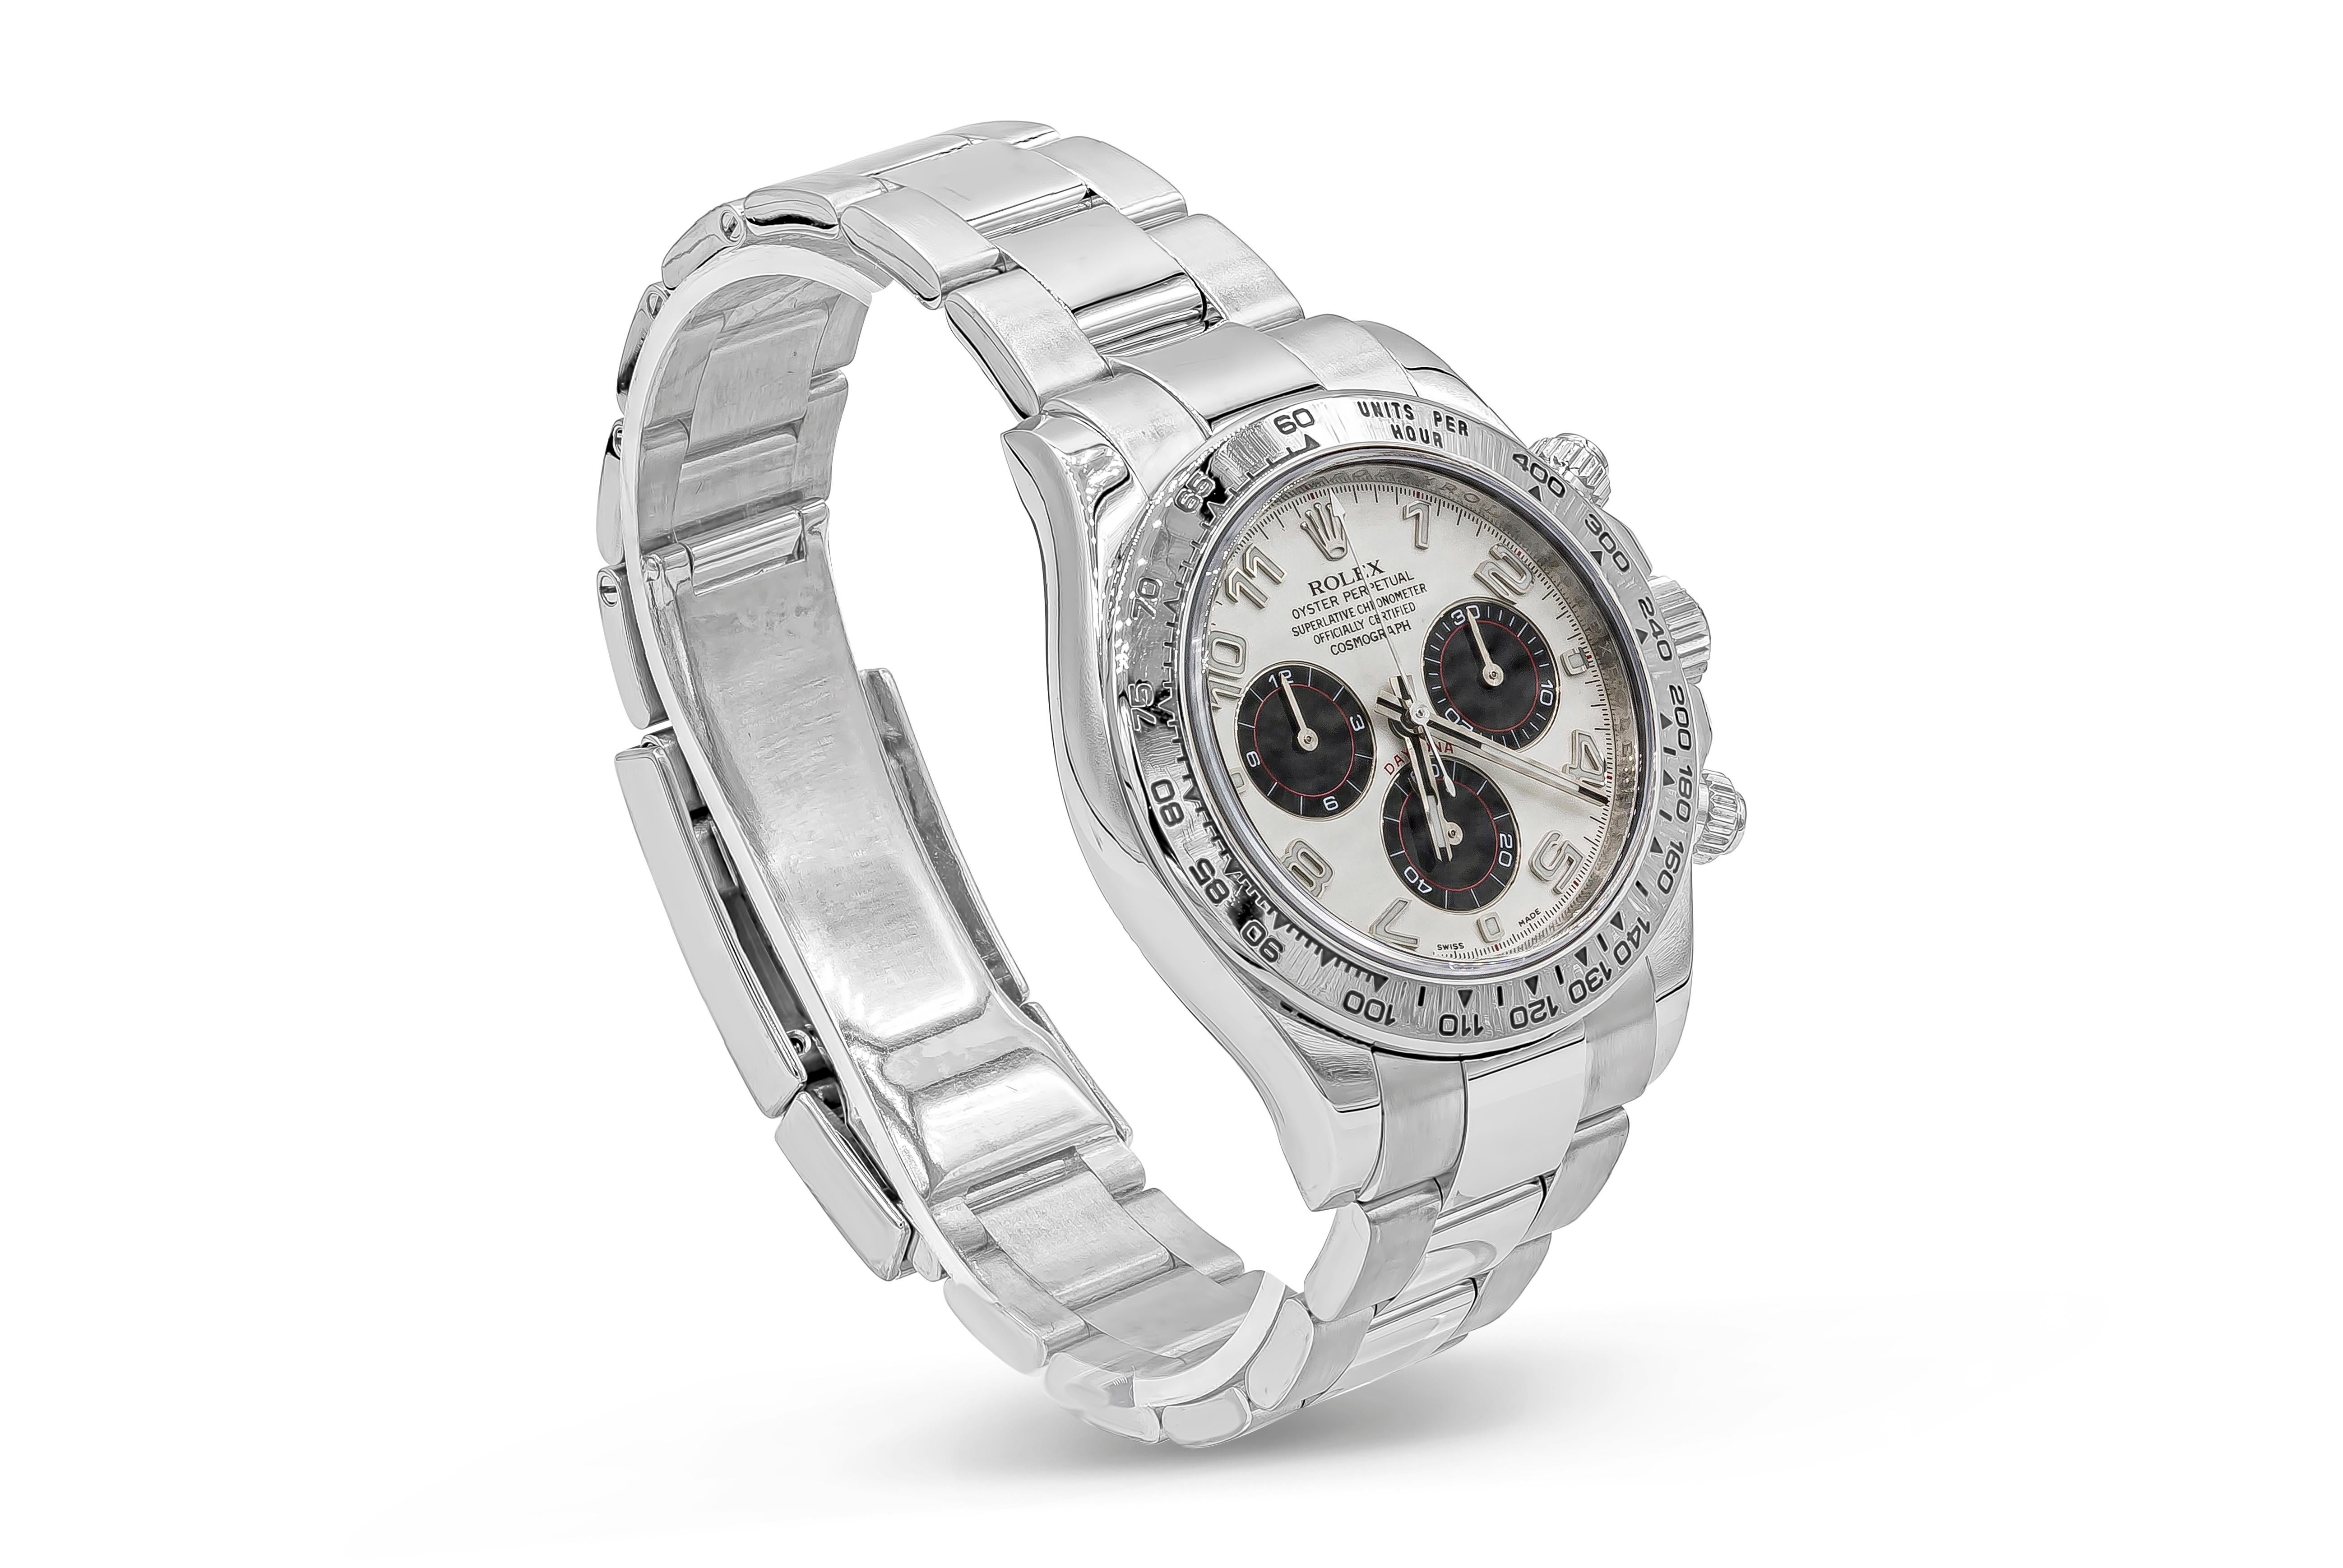 Rolex Daytona Chronograph Reference 116509. This watch has became one of the most iconic watches Rolex has ever made and is sought after all over the world At the heart of this 40 mm 18k white gold watch case with an engraved tachymeter bezel. With